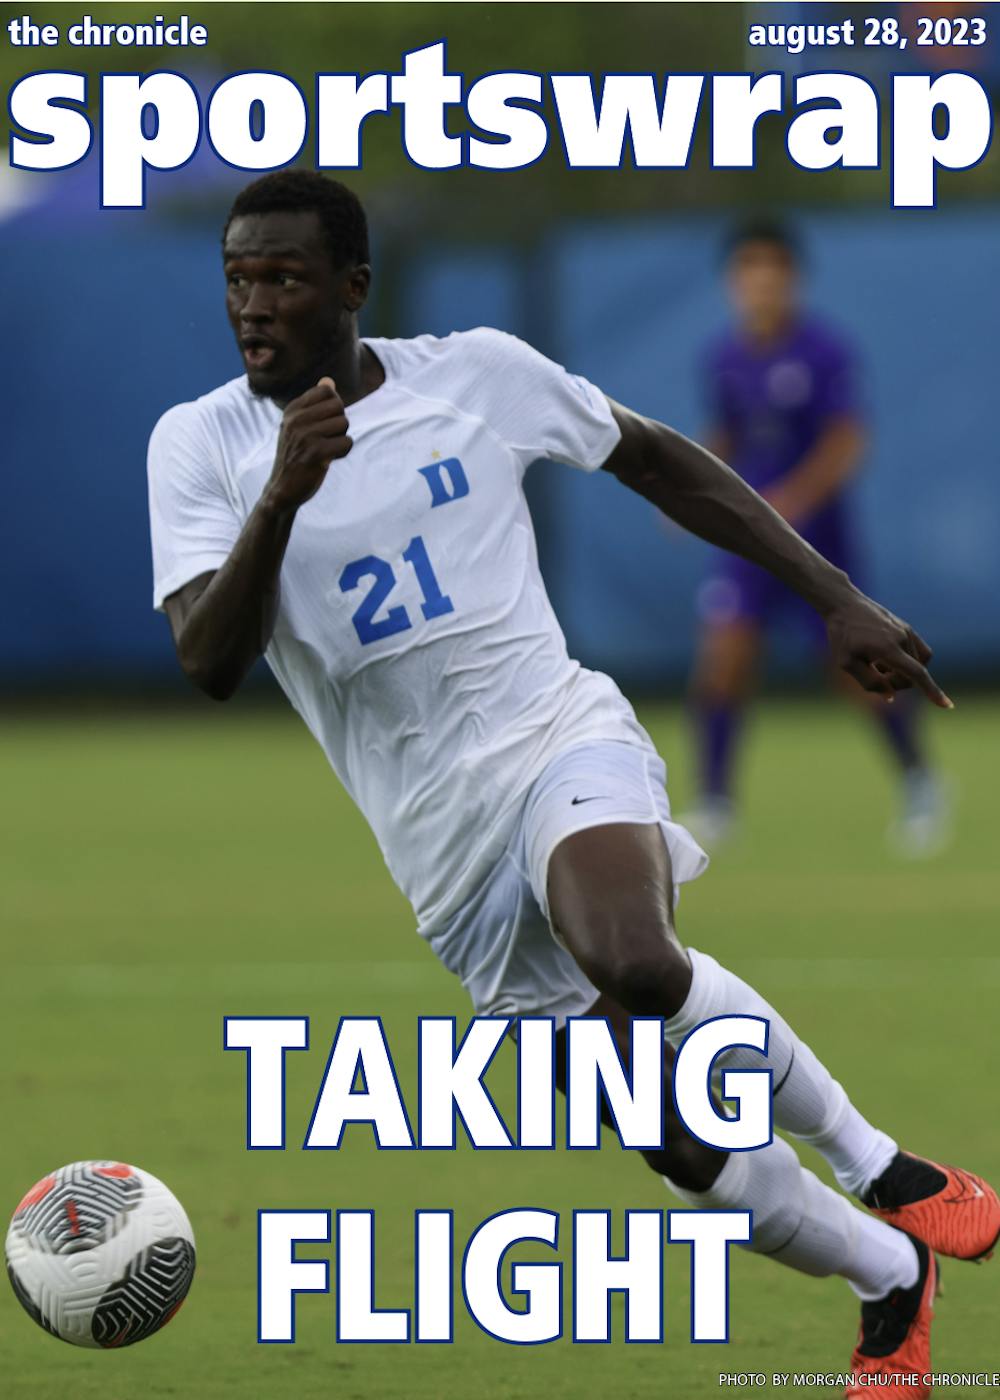 Graduate forward Forster Ajago dribbles with the ball during Duke's 6-0 win against Furman Sunday.